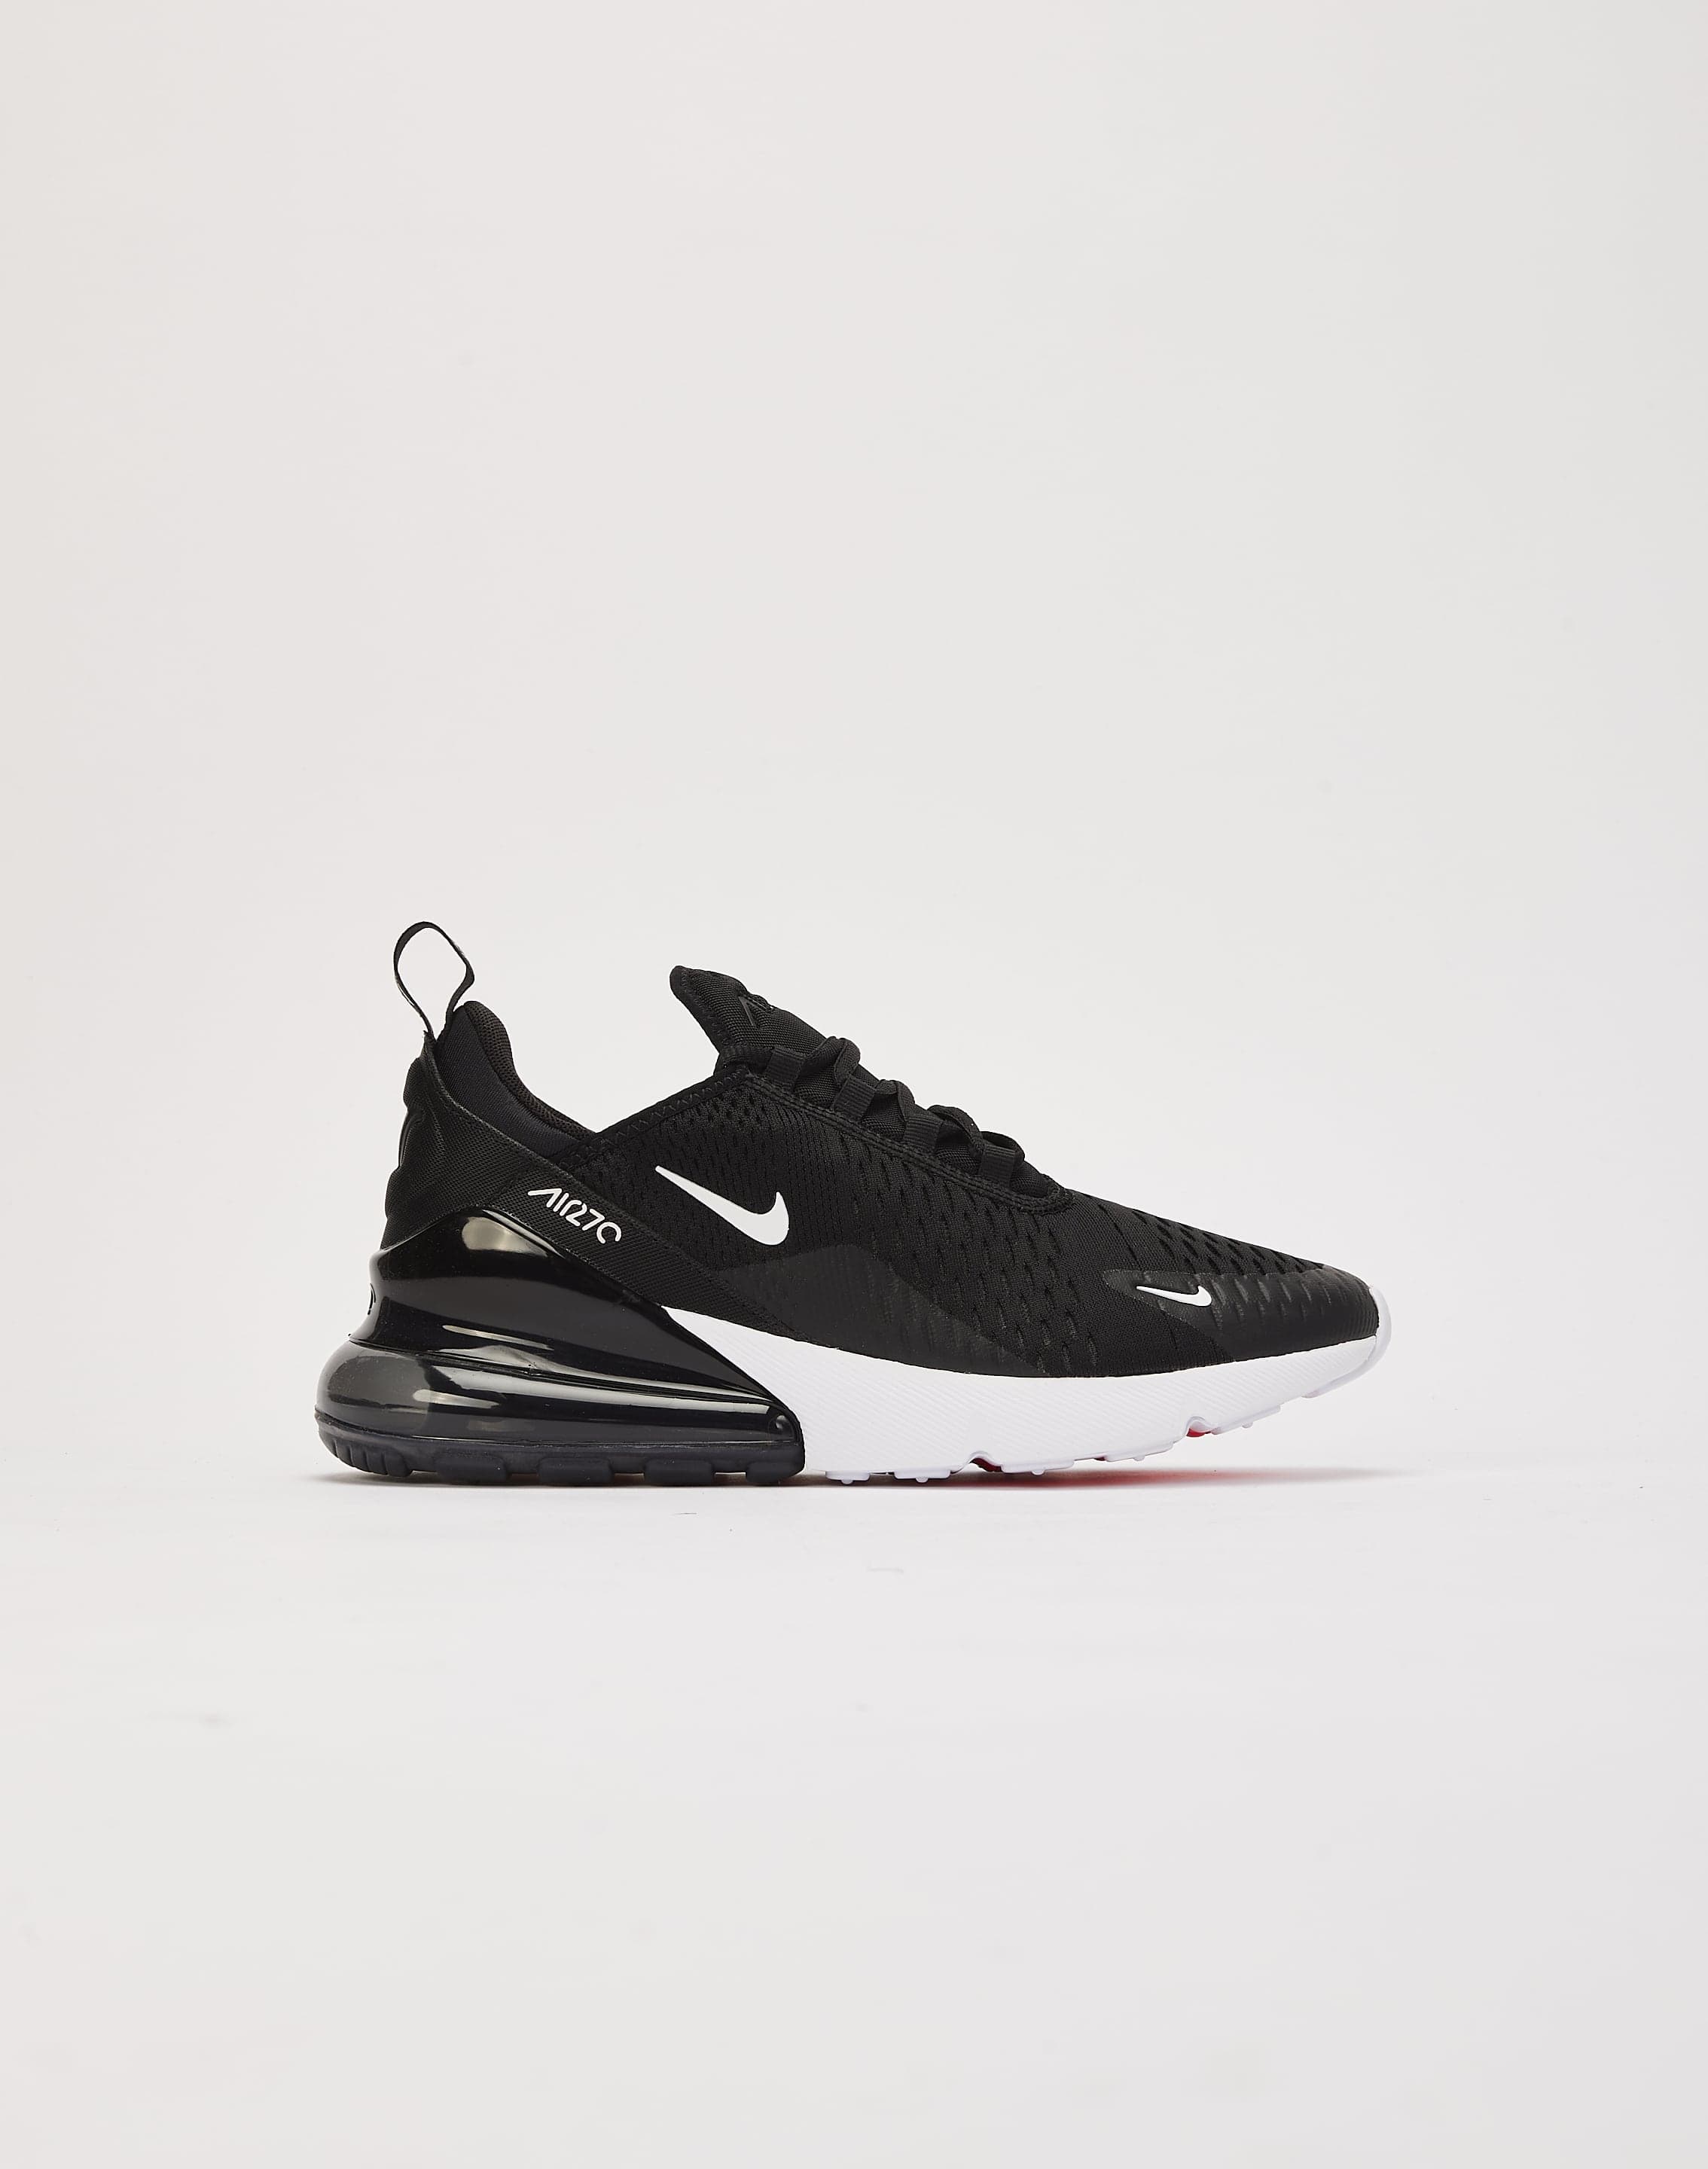 Nike Boys' Big Kids' Air Max 270 React Casual Shoes in Grey Size 6.0